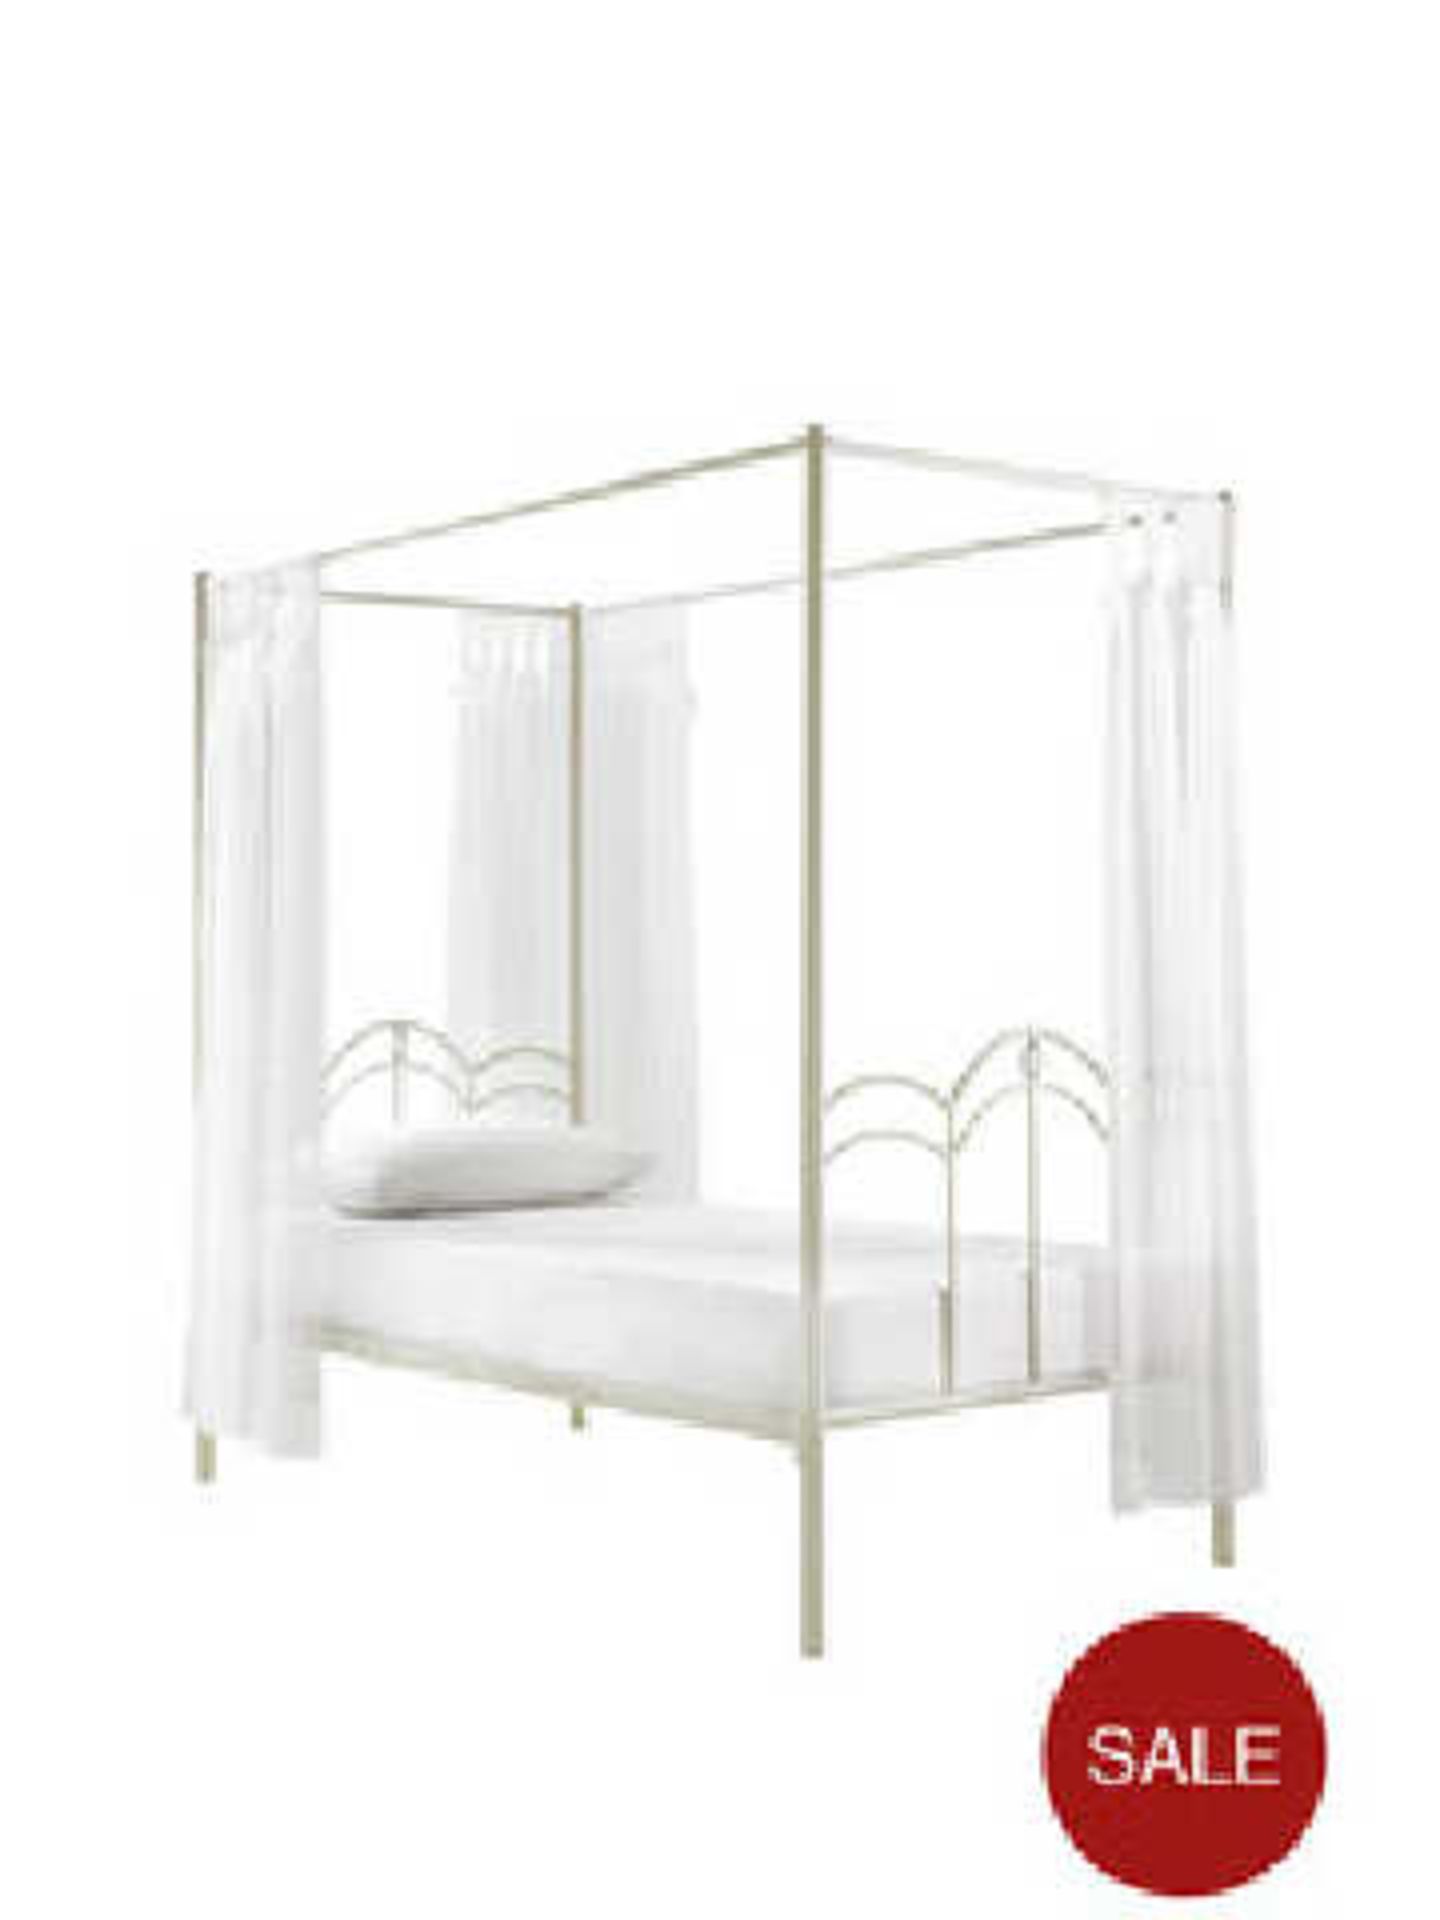 BOXED  RUBY CREAM SINGLE FOUR POSTER BED RRP £325 (2 BOXES)